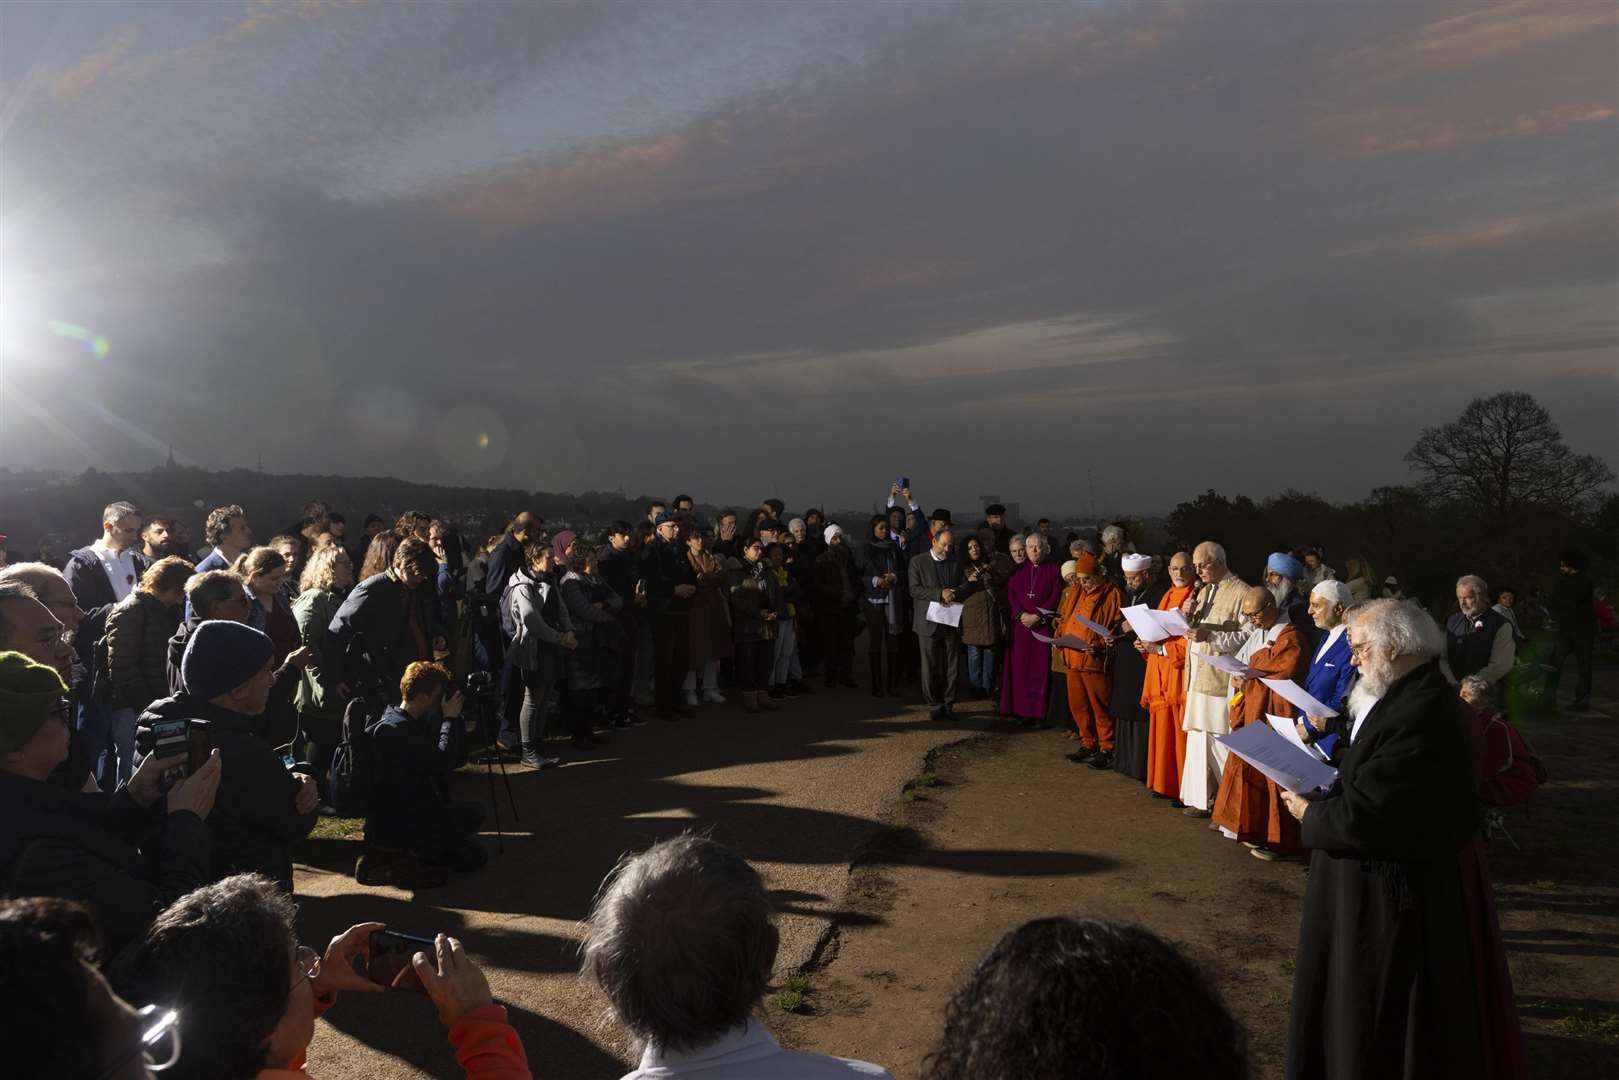 Leaders of various religions gathered in London for a multi-faith ceremony focused on the climate (David Parry/PA)